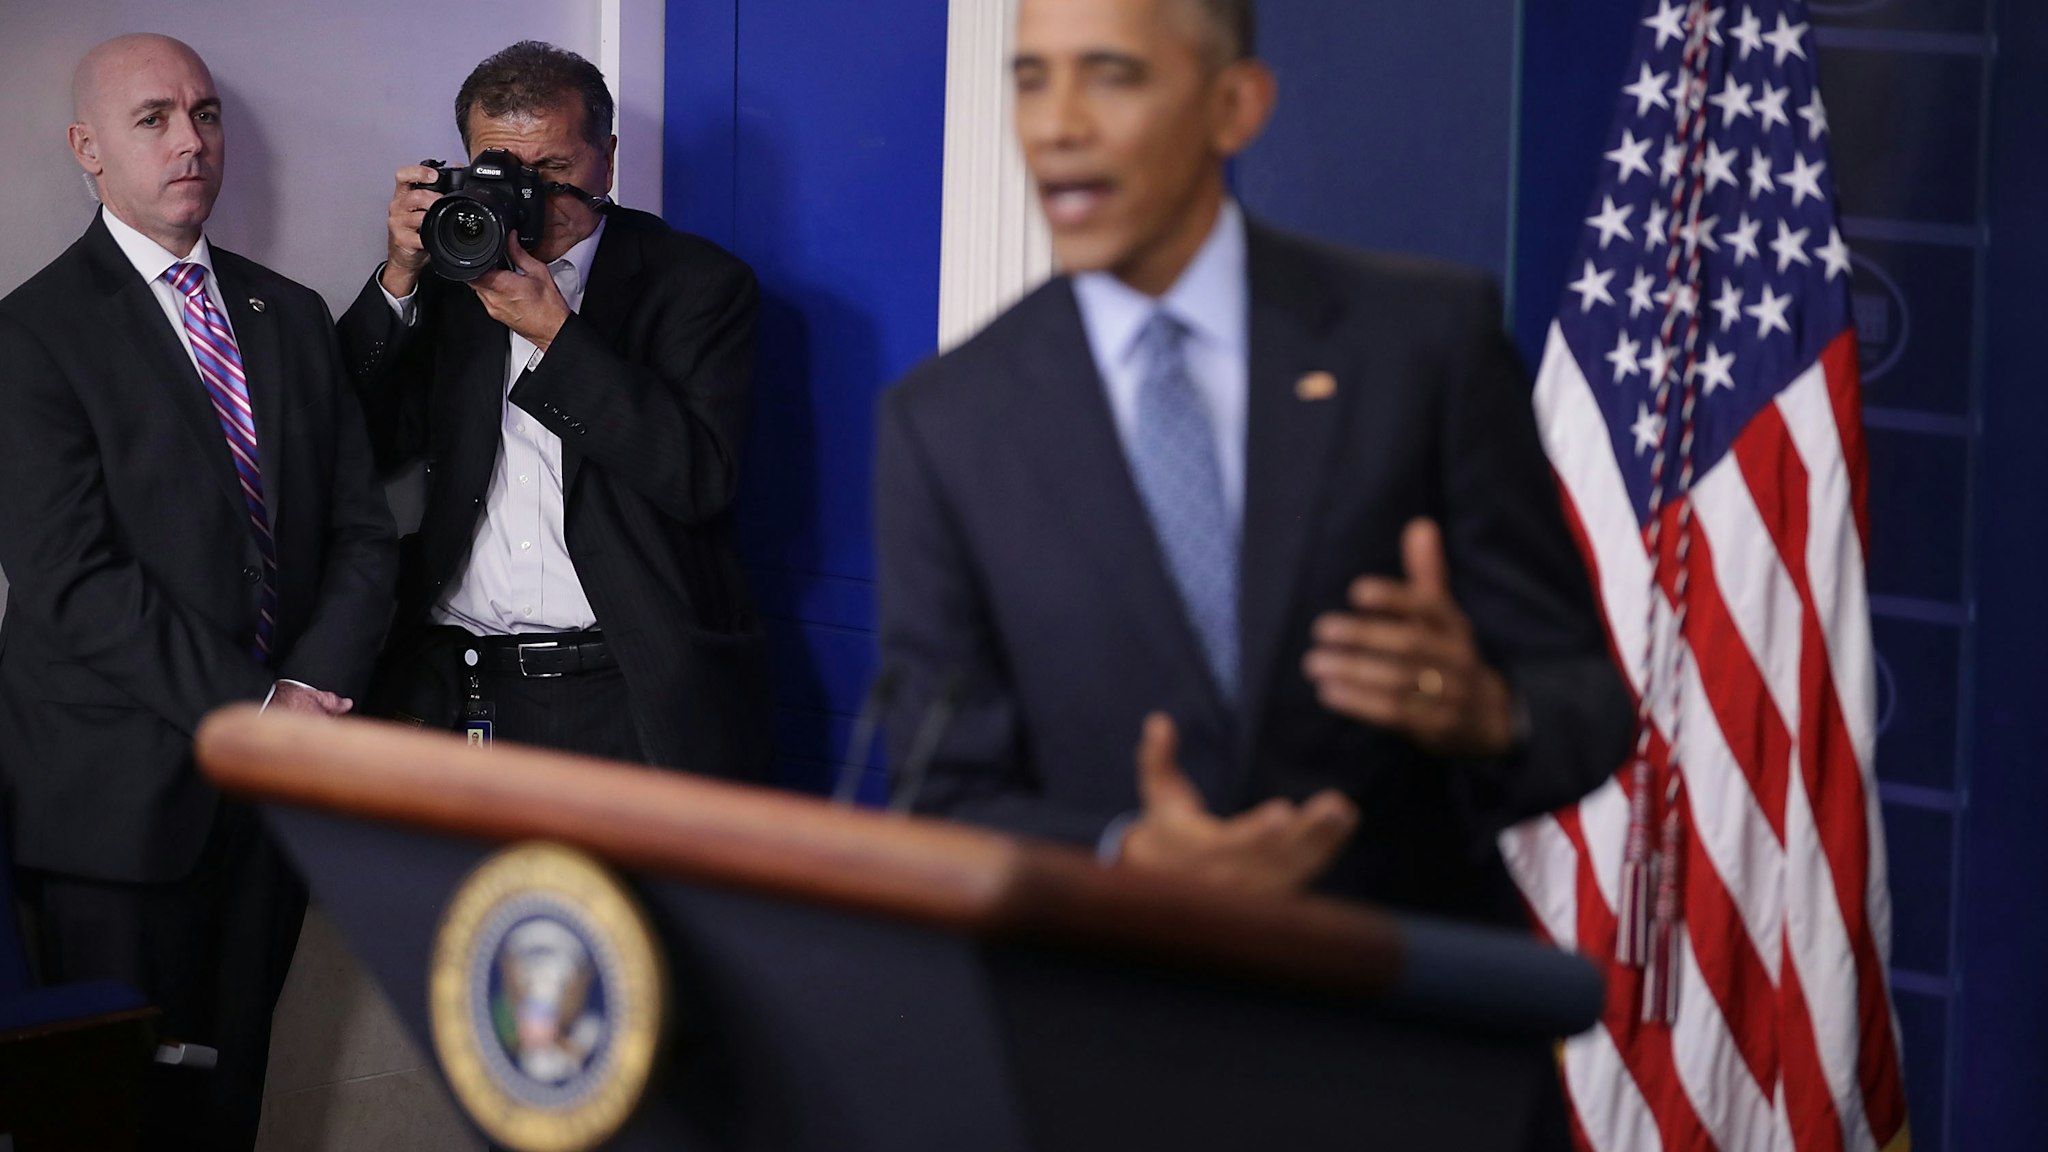 White House Chief Photographer Pete Souza makes images of U.S. President Barack Obama during the last news conference of his presidency in the Brady Press Briefing Room at the White House January 18, 2017 in Washington, DC. This was Obama's final question-and-answer session with reporters before New York real estate mogul and reality television personality Donald Trump is sworn in as the 45th president of the United States on Friday. (Photo by Chip Somodevilla/Getty Images)